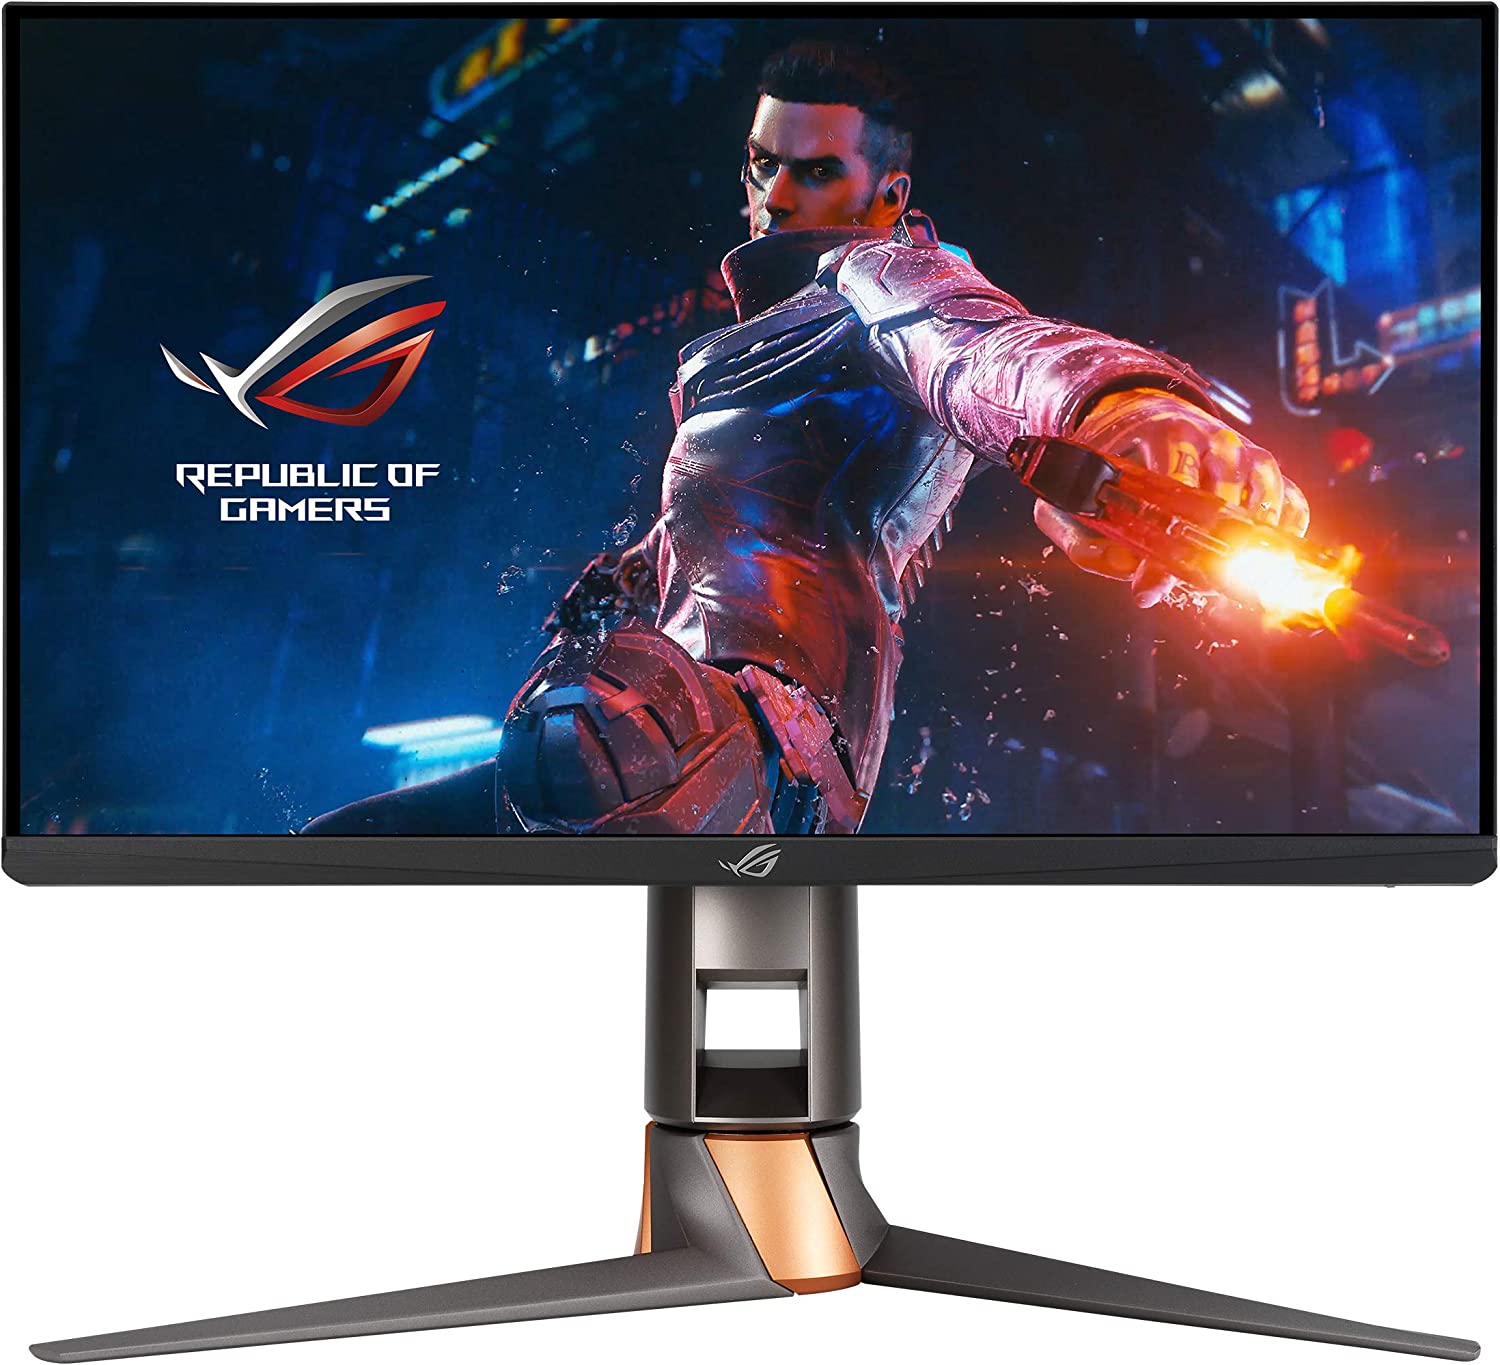 The best gaming monitors